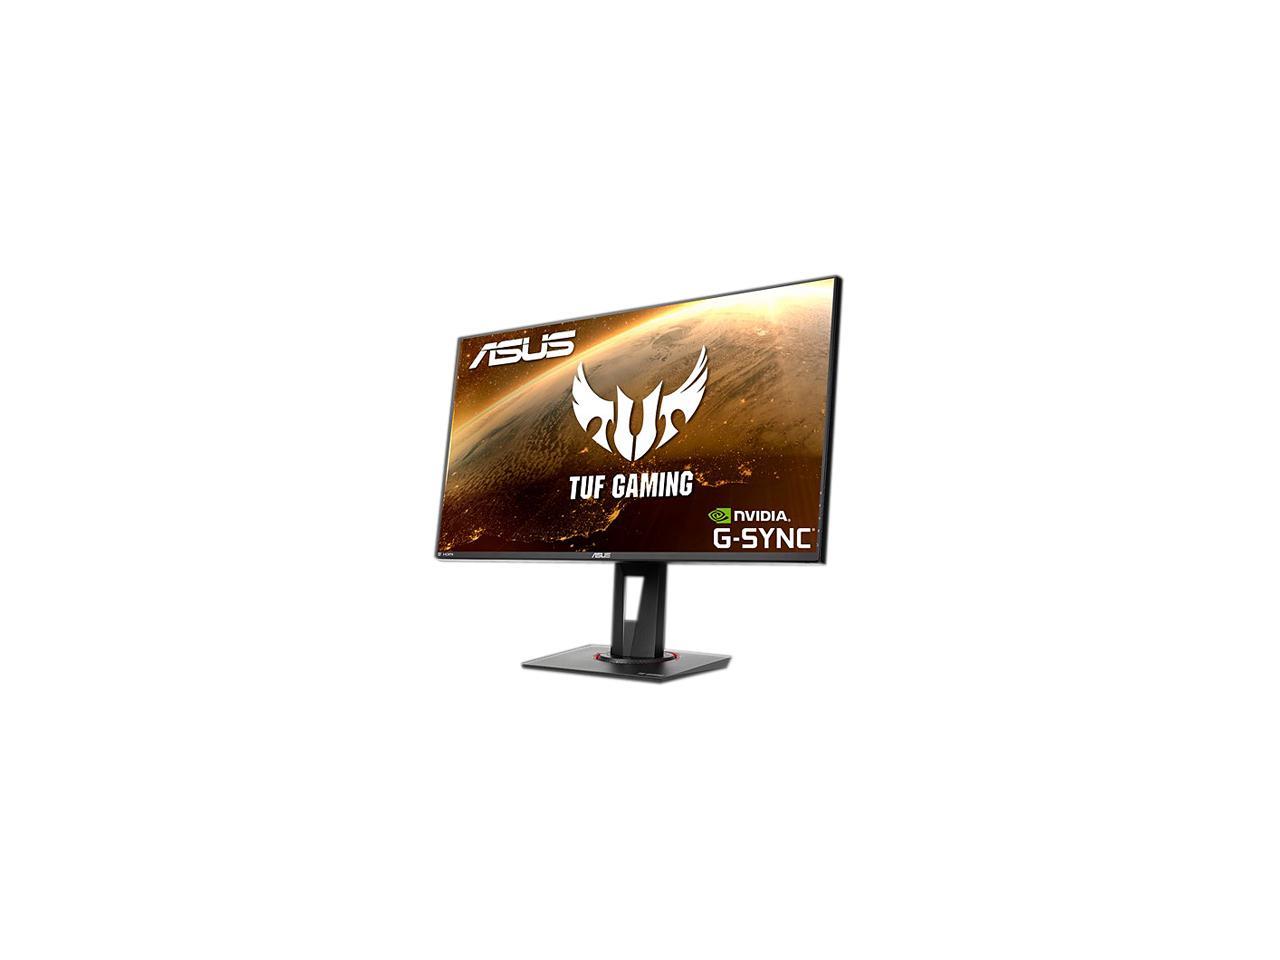 Asus Vg279Qm 27 Inch Widescreen 1,000:1 1Ms Hdmi/Displayport Led Lcd Monitor, W/ Speakers